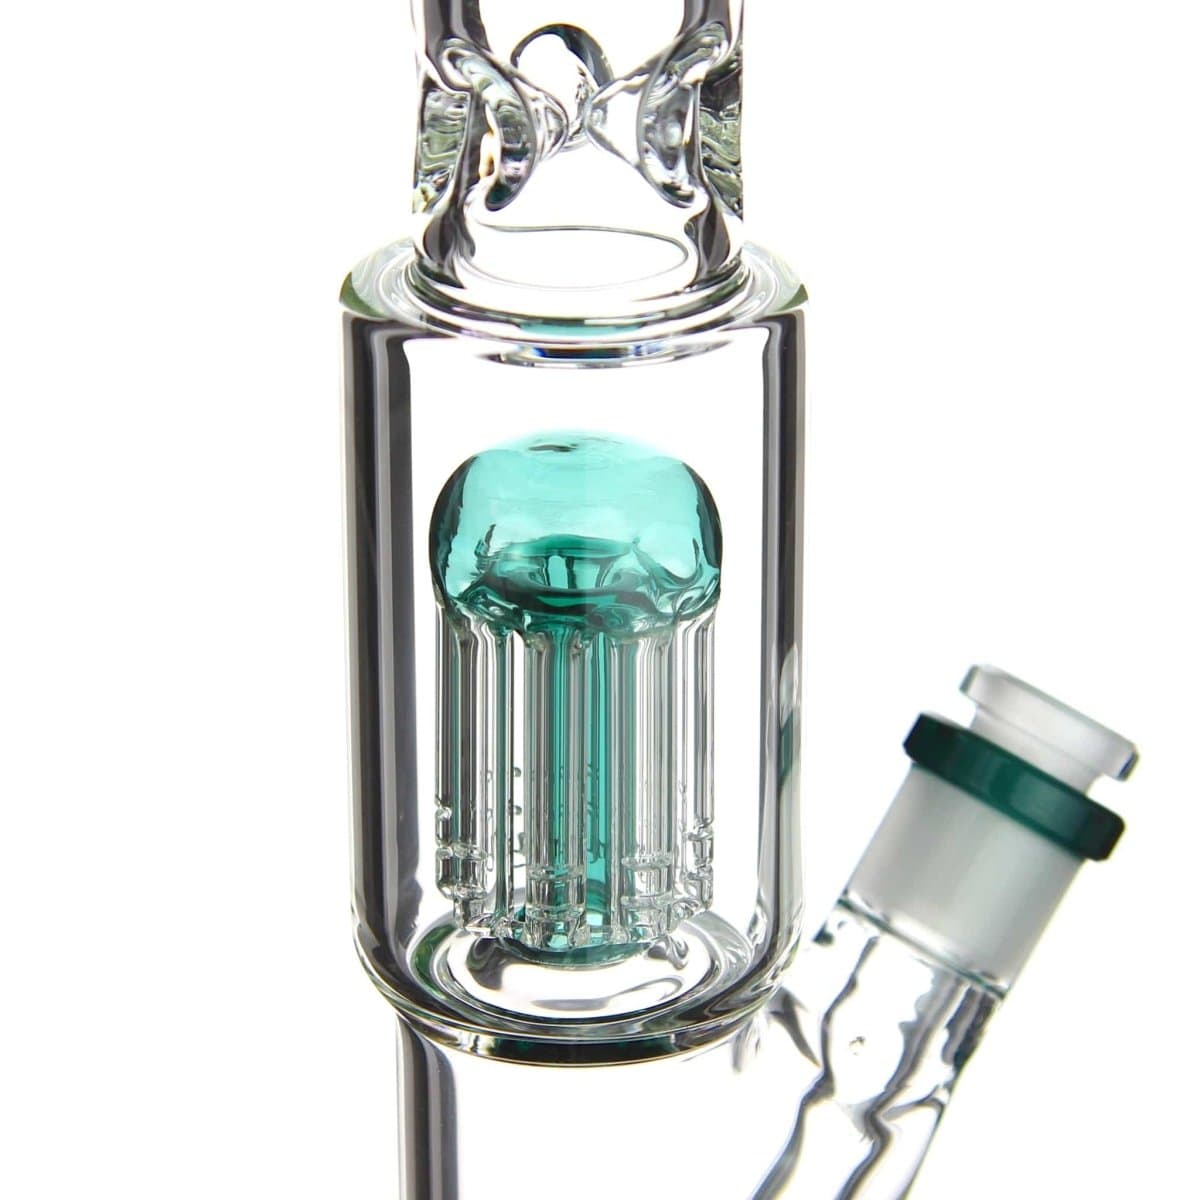 Benext Generation Glass Canned Jellyfish Straight Tube